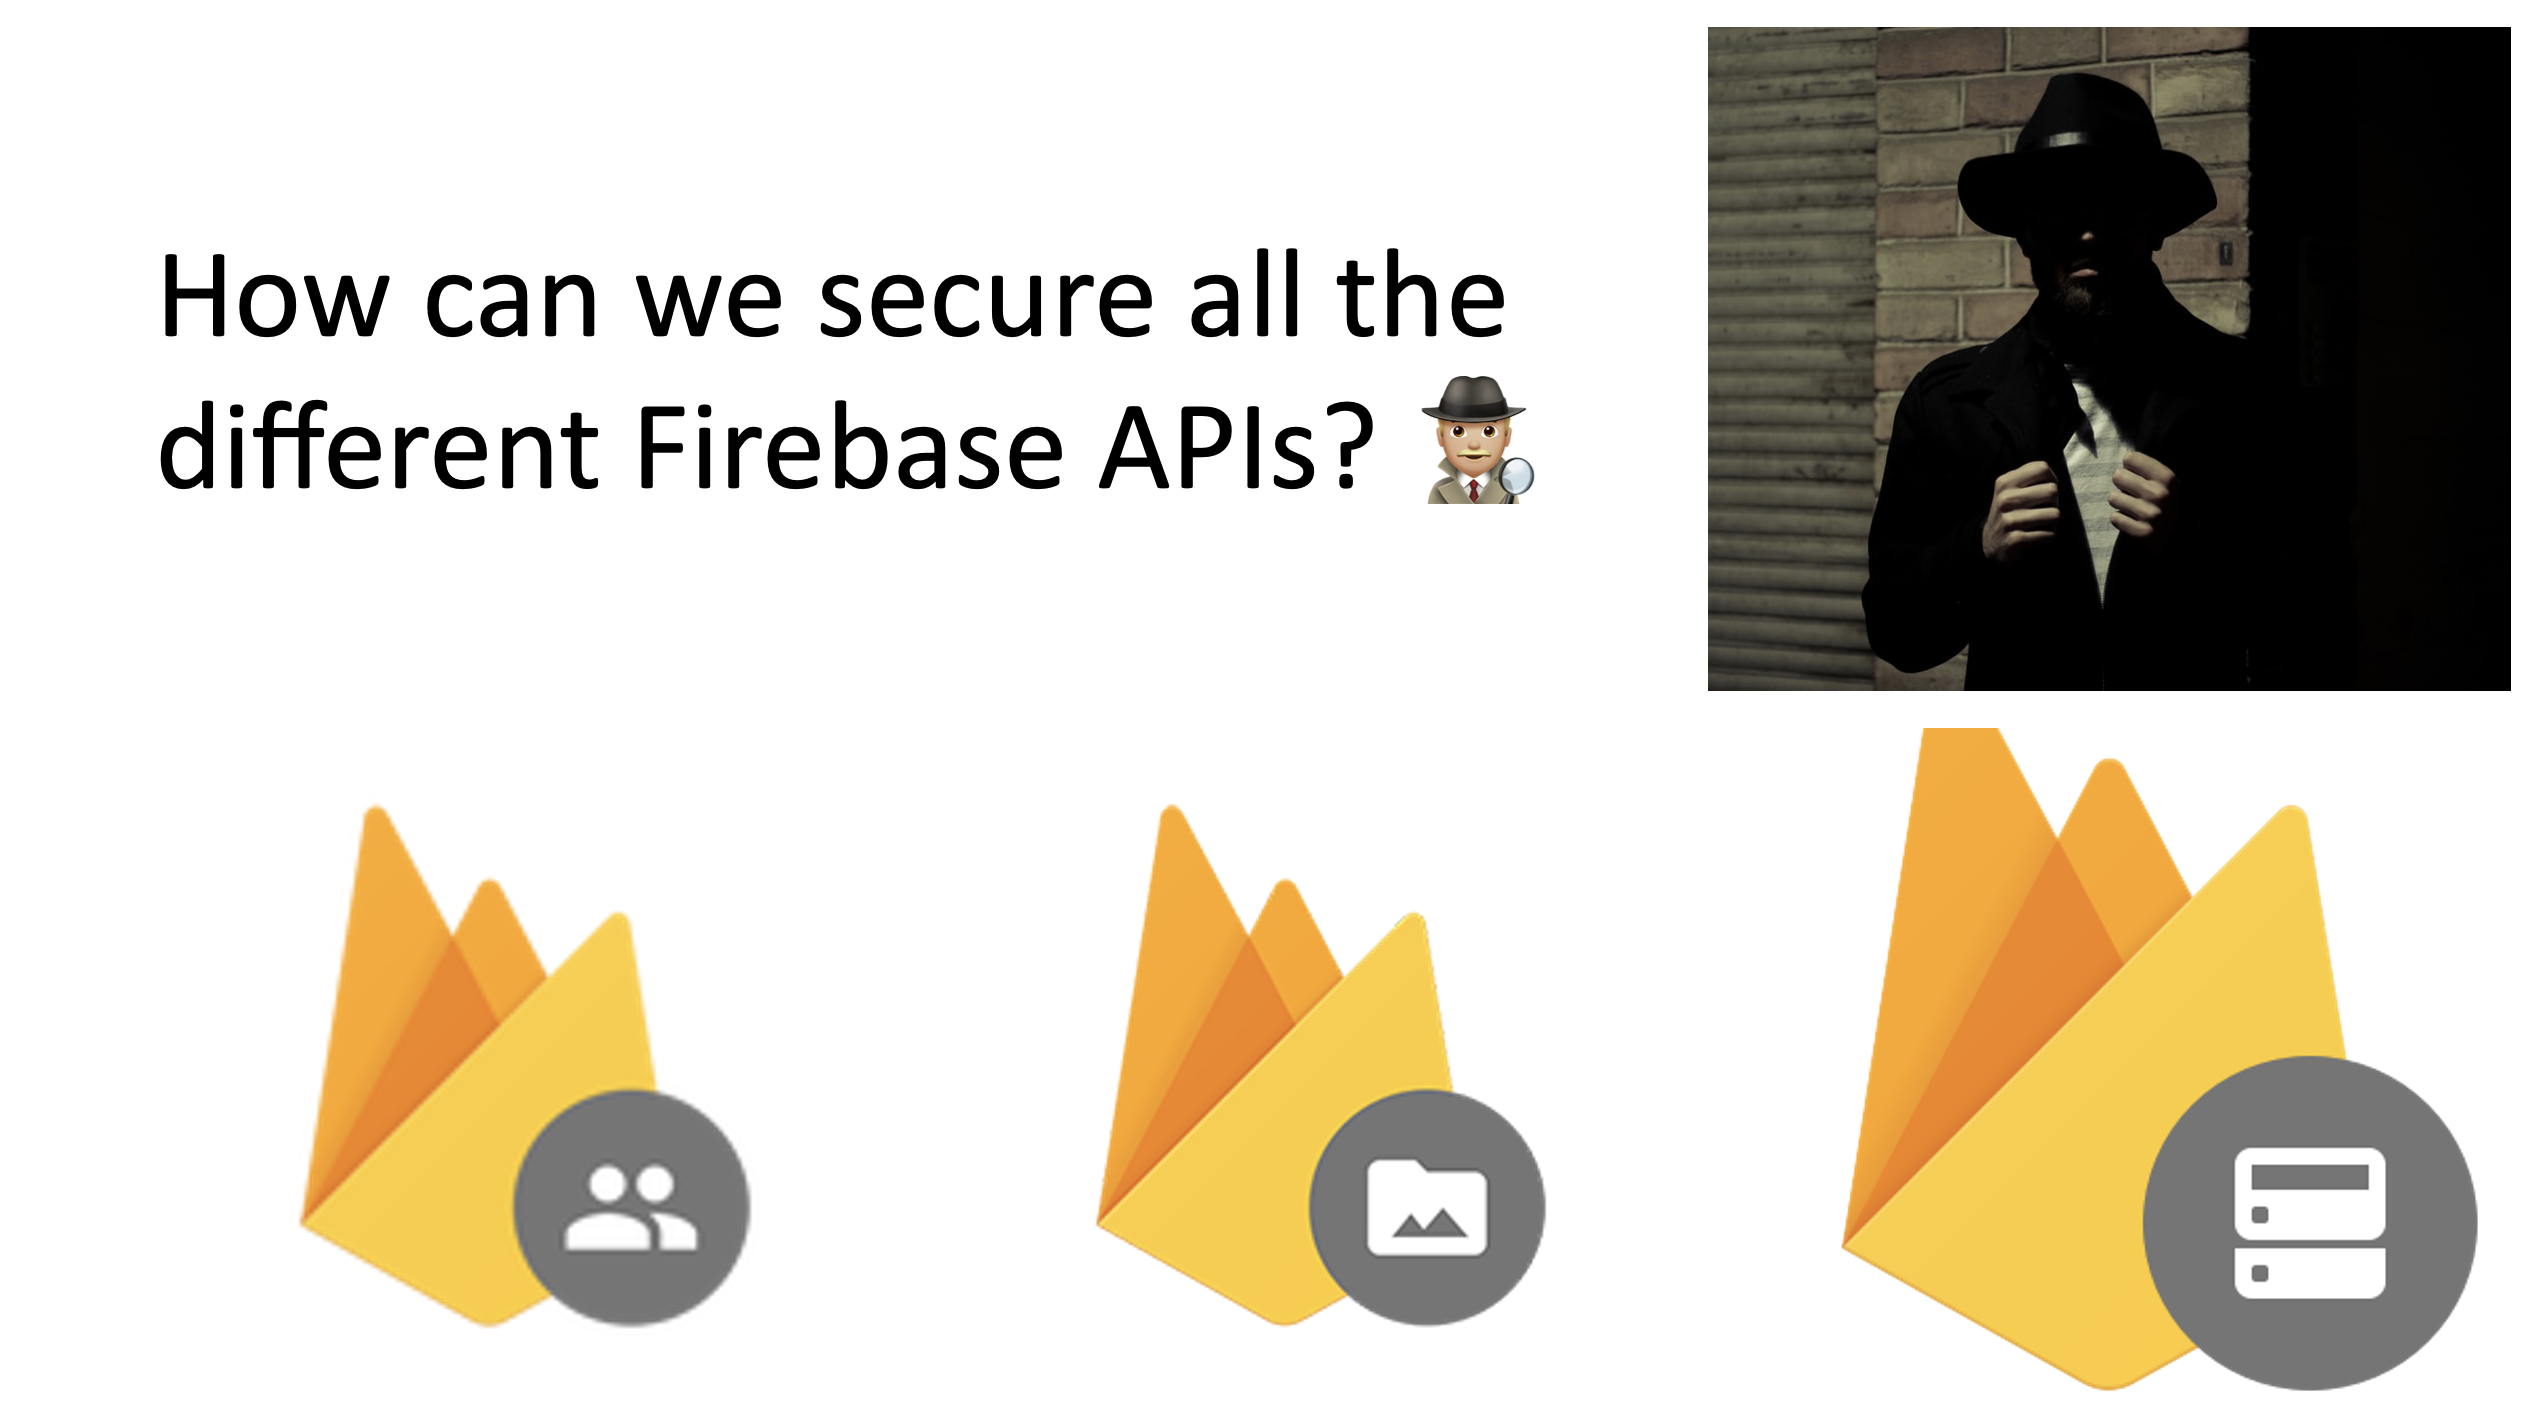 Banner showing the logo for Ionic Framework, Capacitor, Firebase, and Firestore